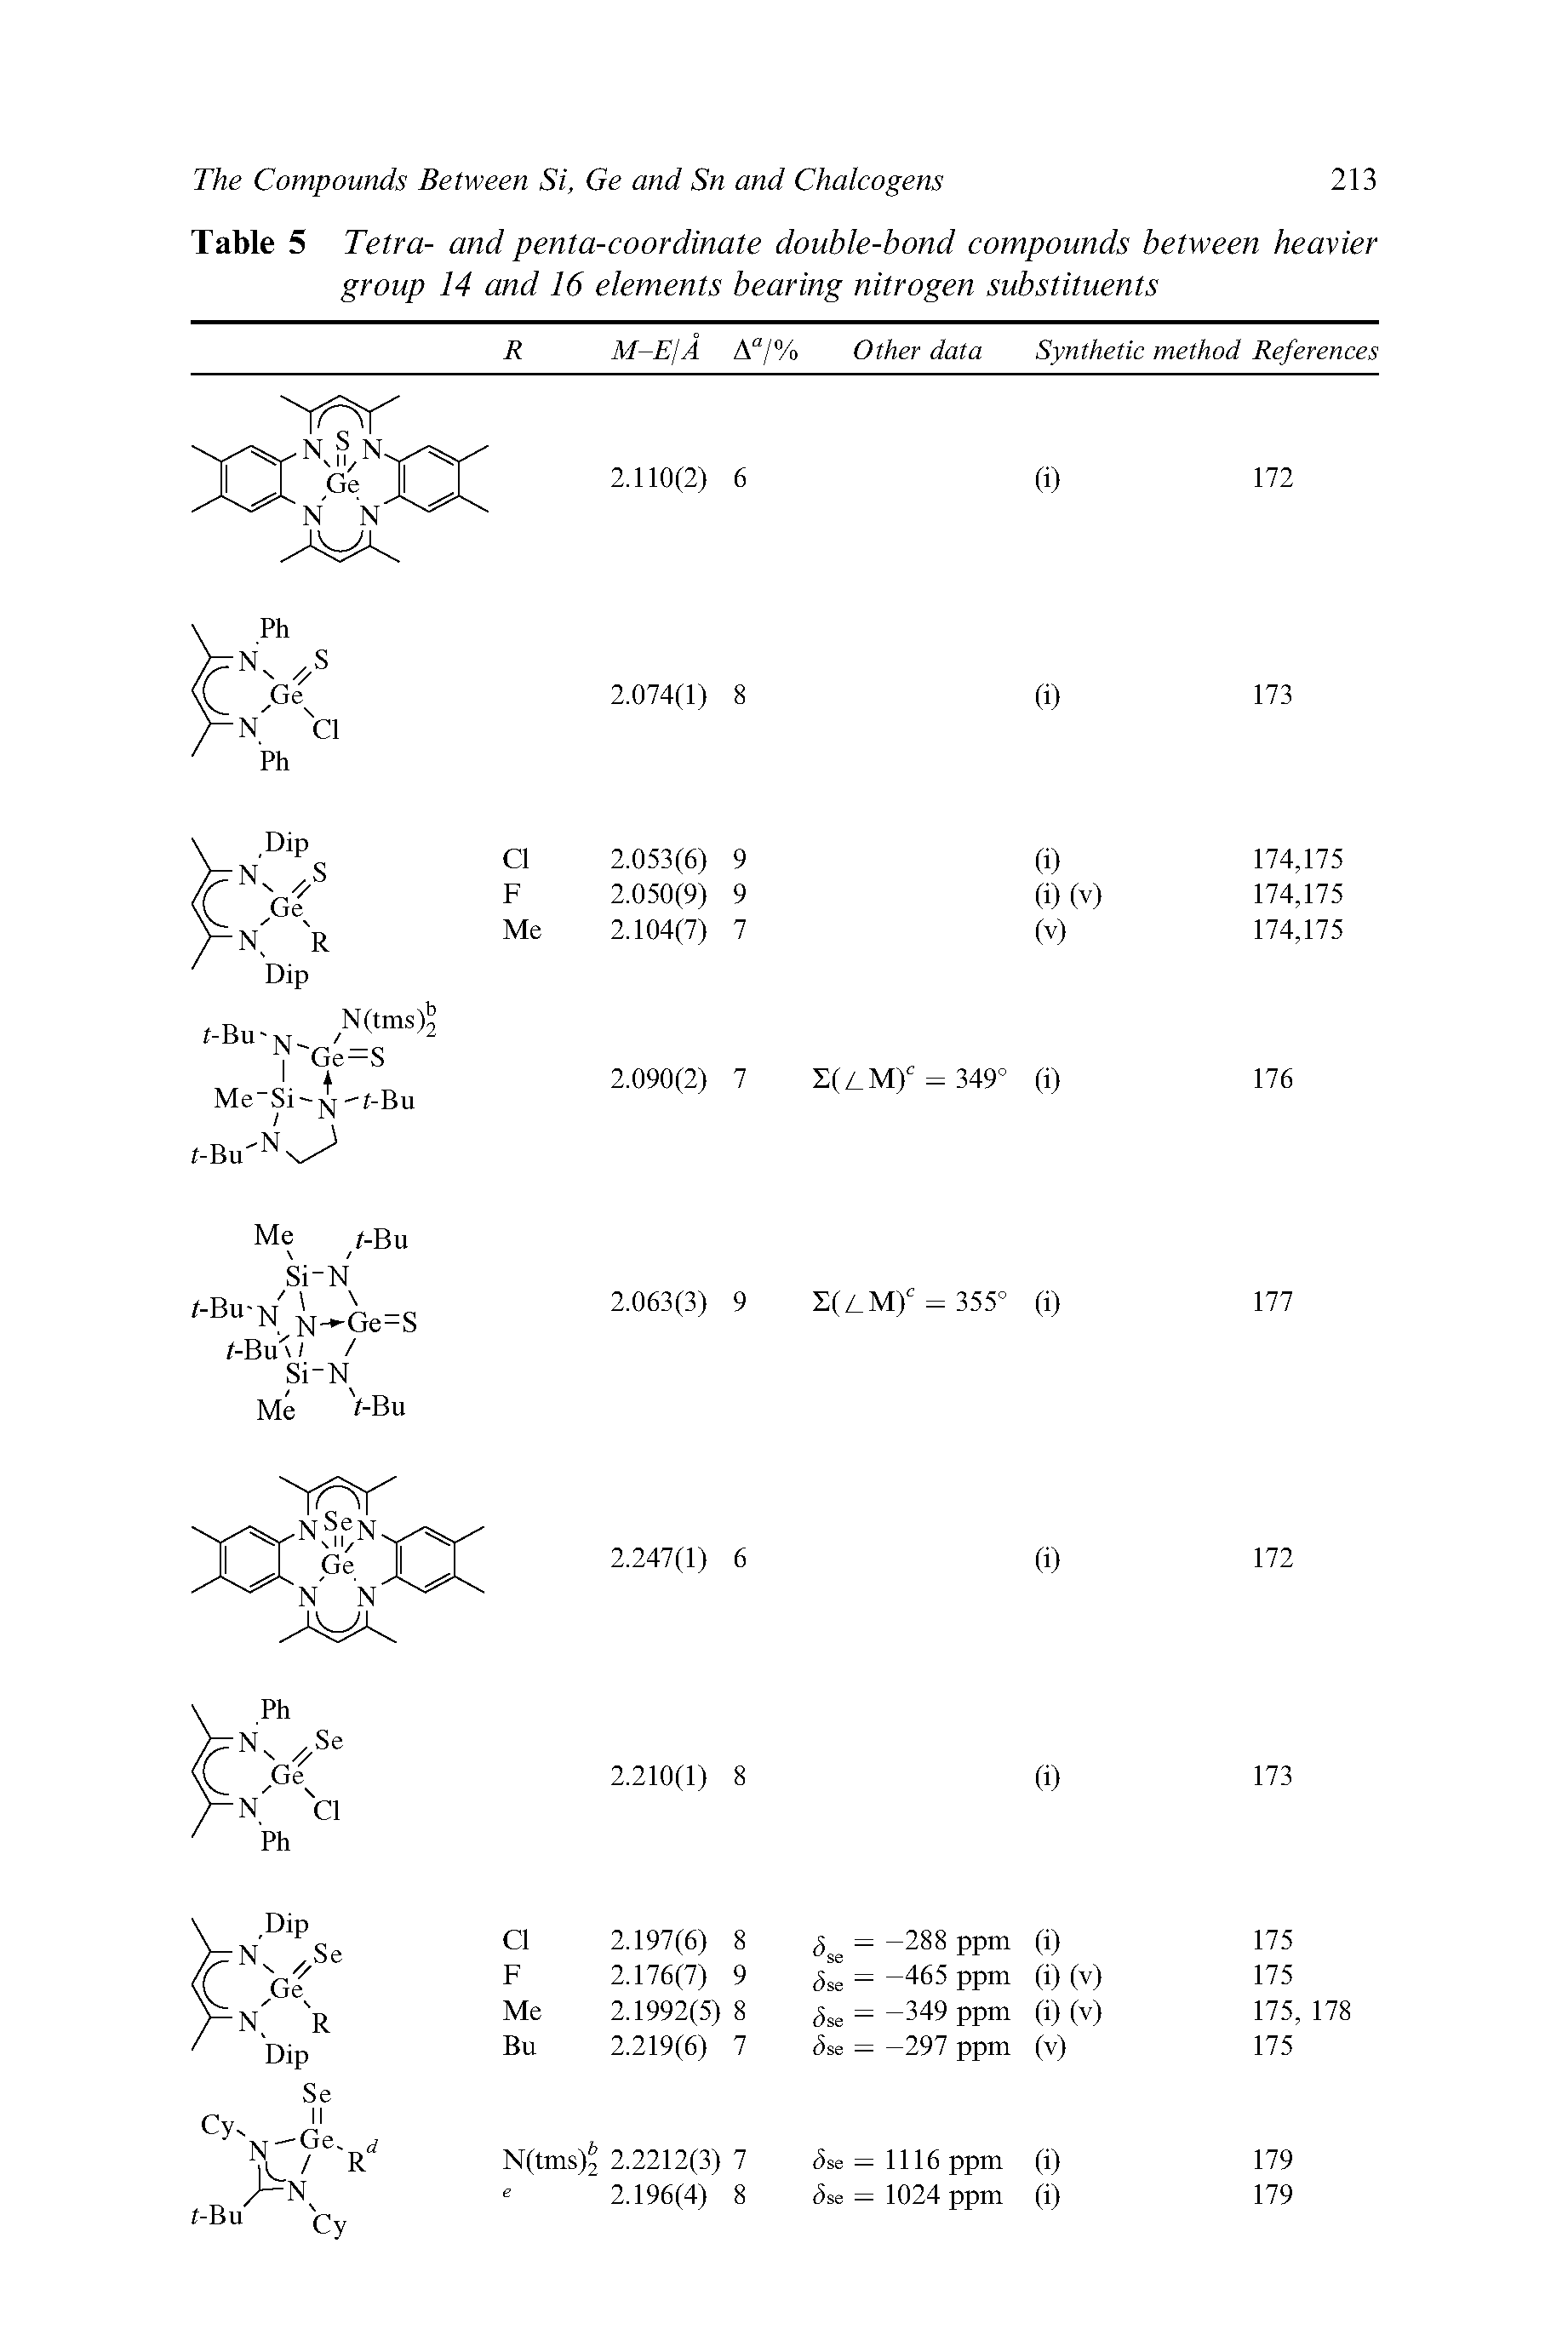 Table 5 Tetra- and penta-coordinate double-bond compounds between heavier group 14 and 16 elements bearing nitrogen substituents...